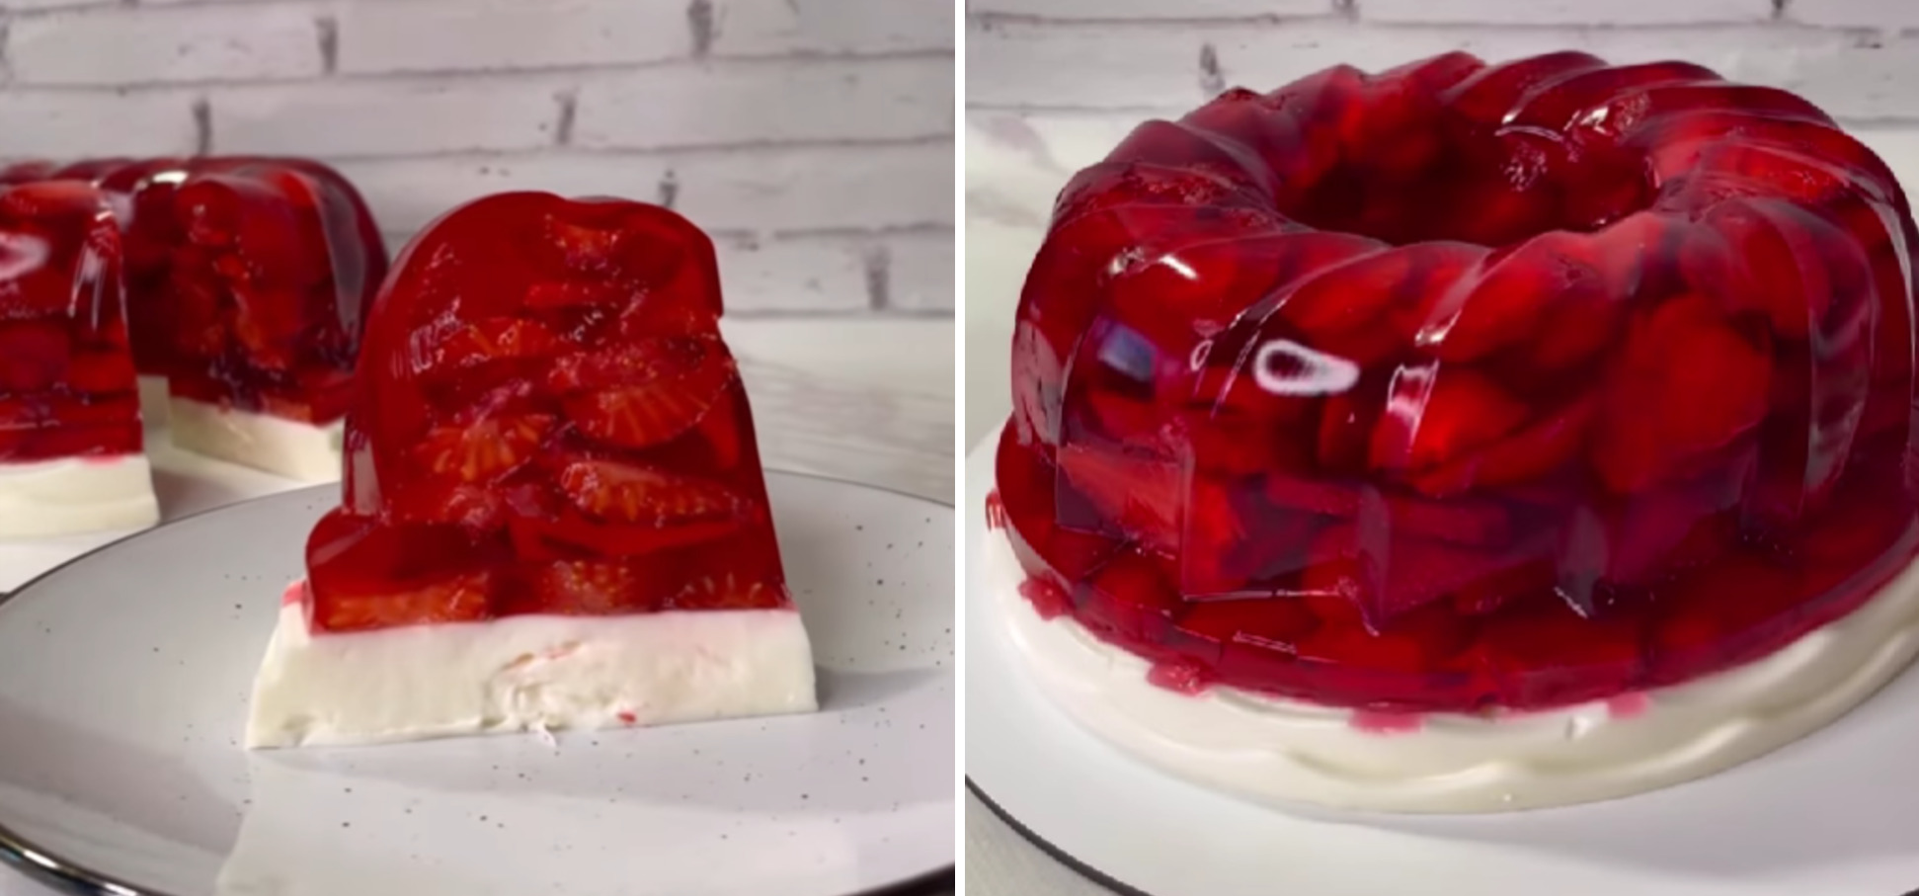 Ready-made jelly cake with strawberries